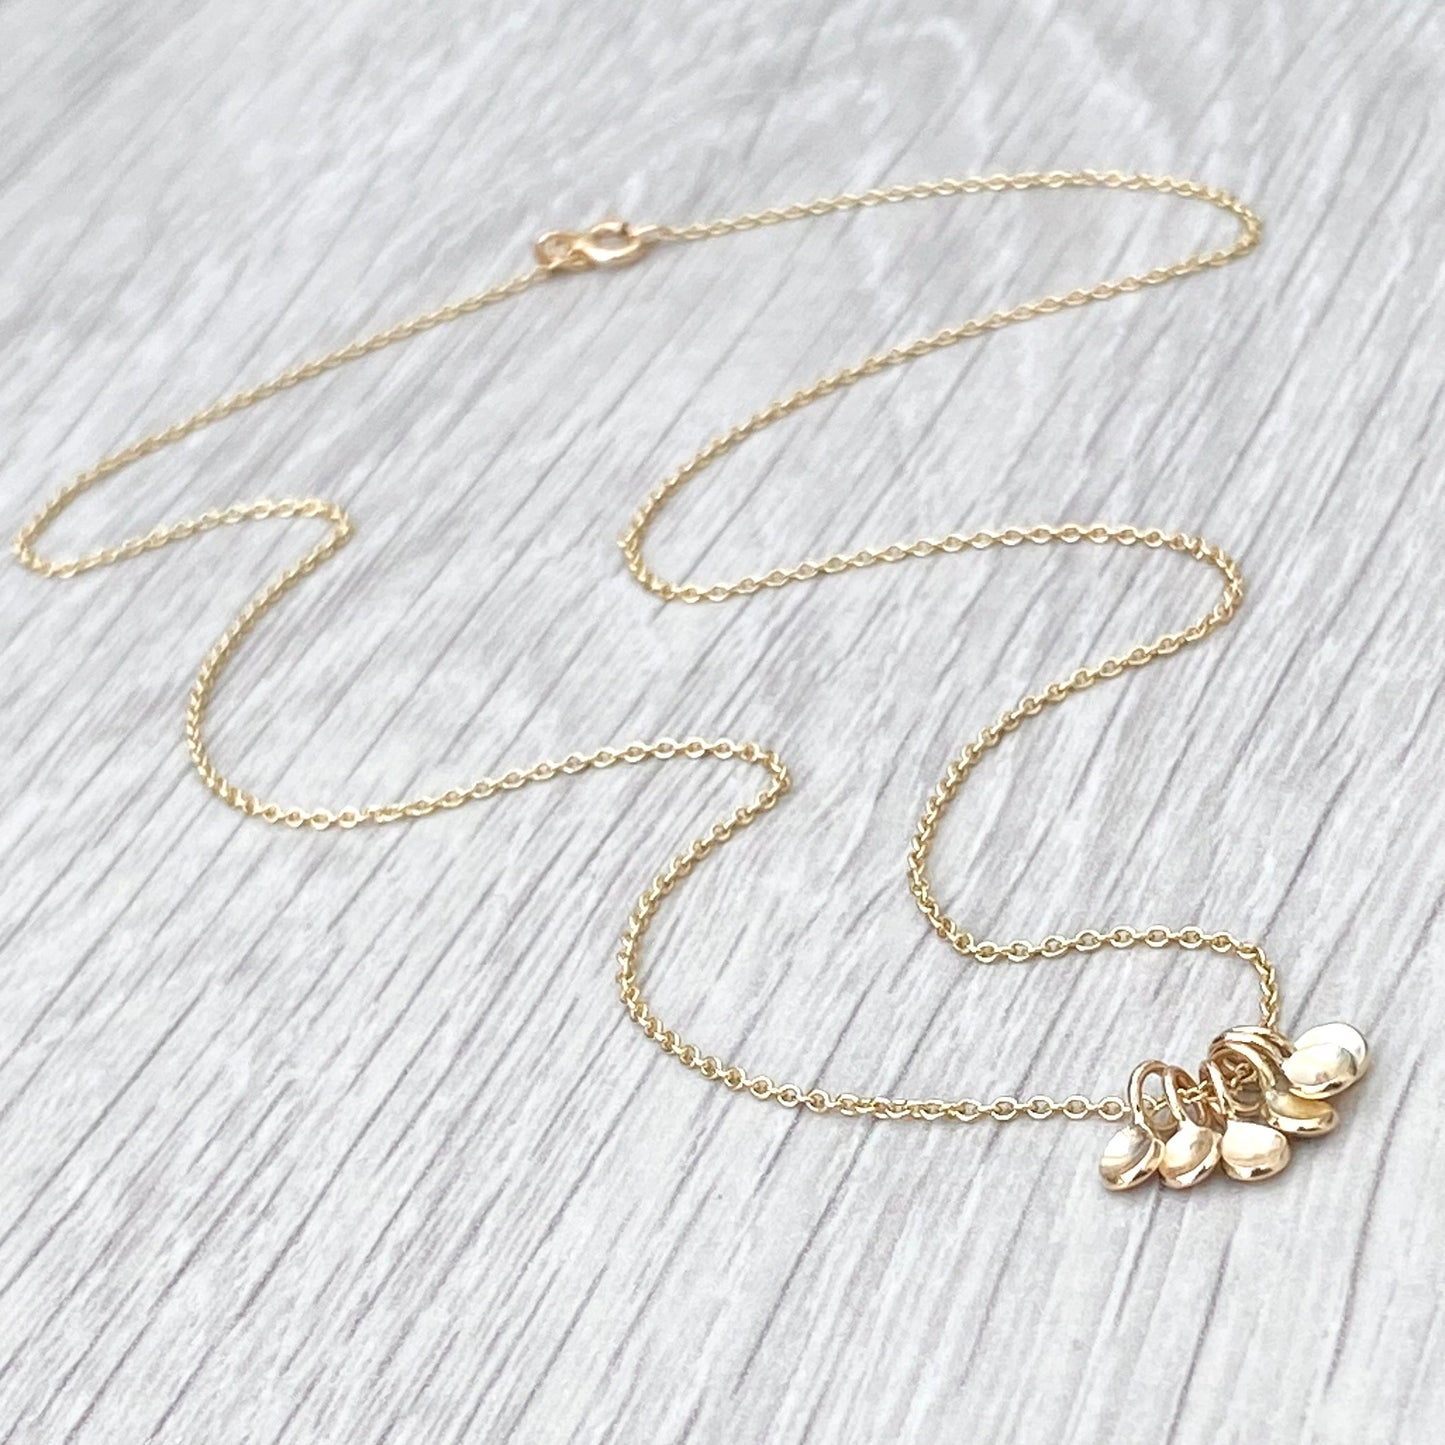 Handmade to order - 9ct yellow gold six tiny petal charm pendants on a 1.2mm wide trace chain